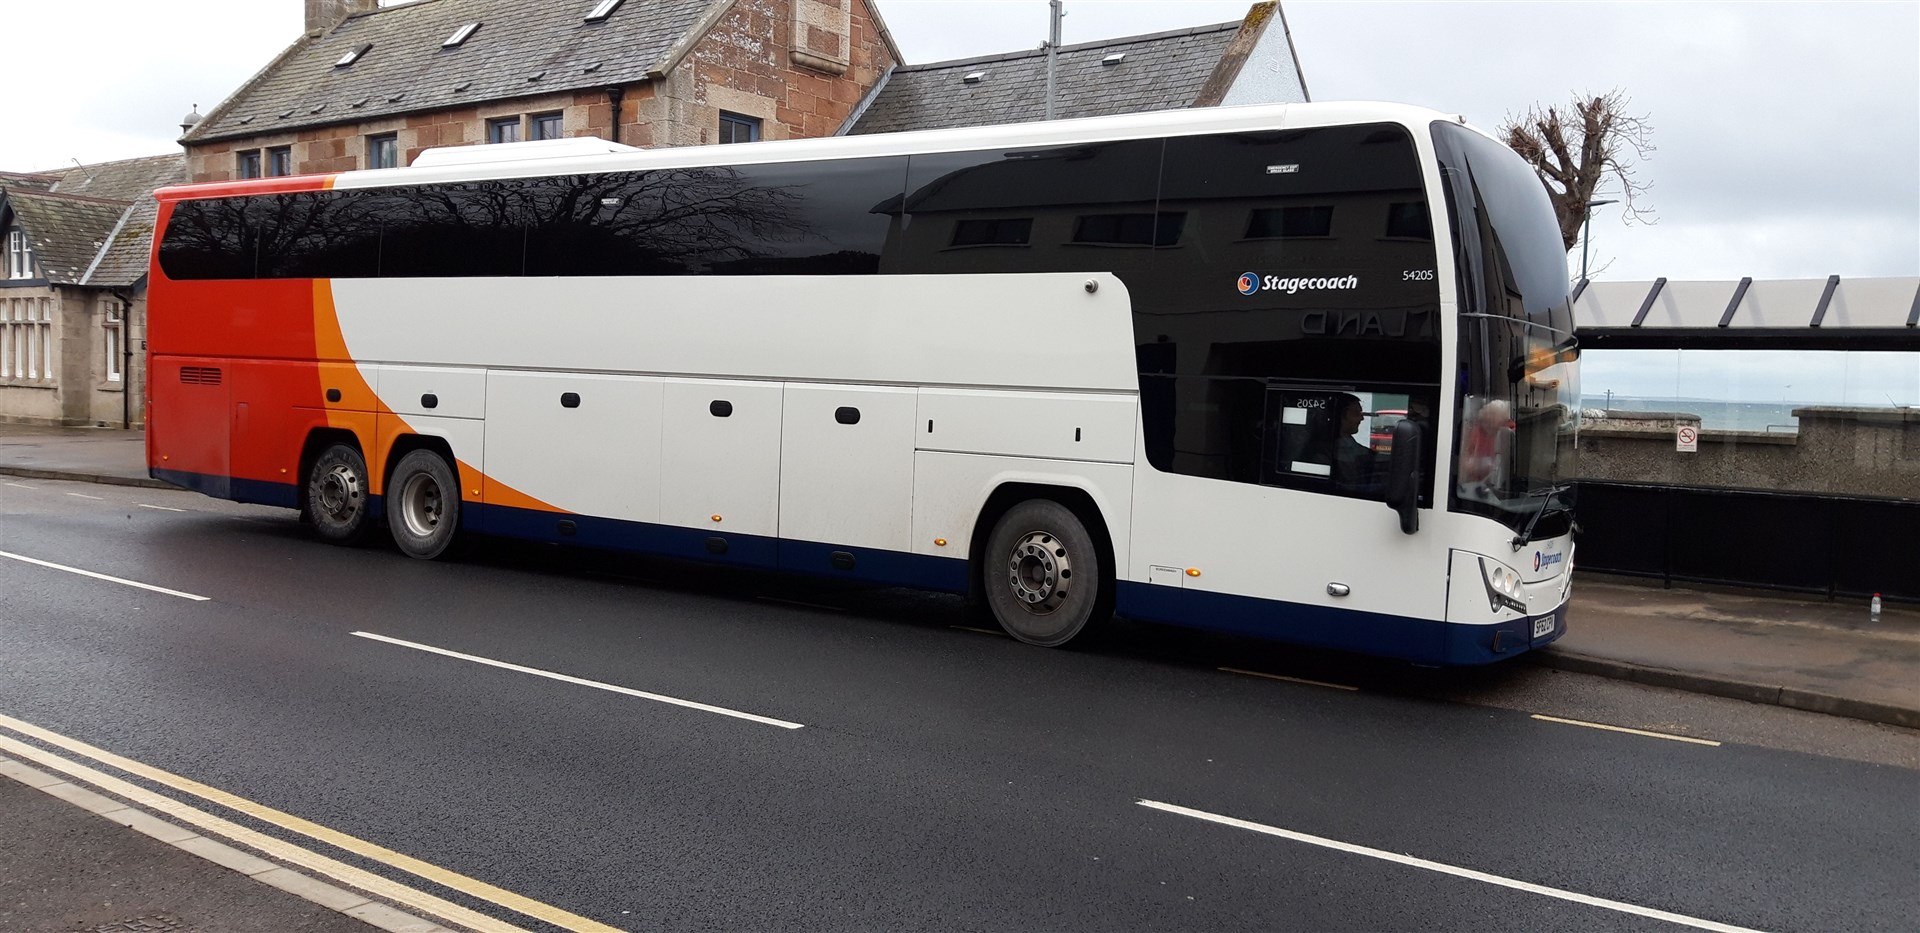 Bus drivers with Stagecoach are helping keep the country moving.